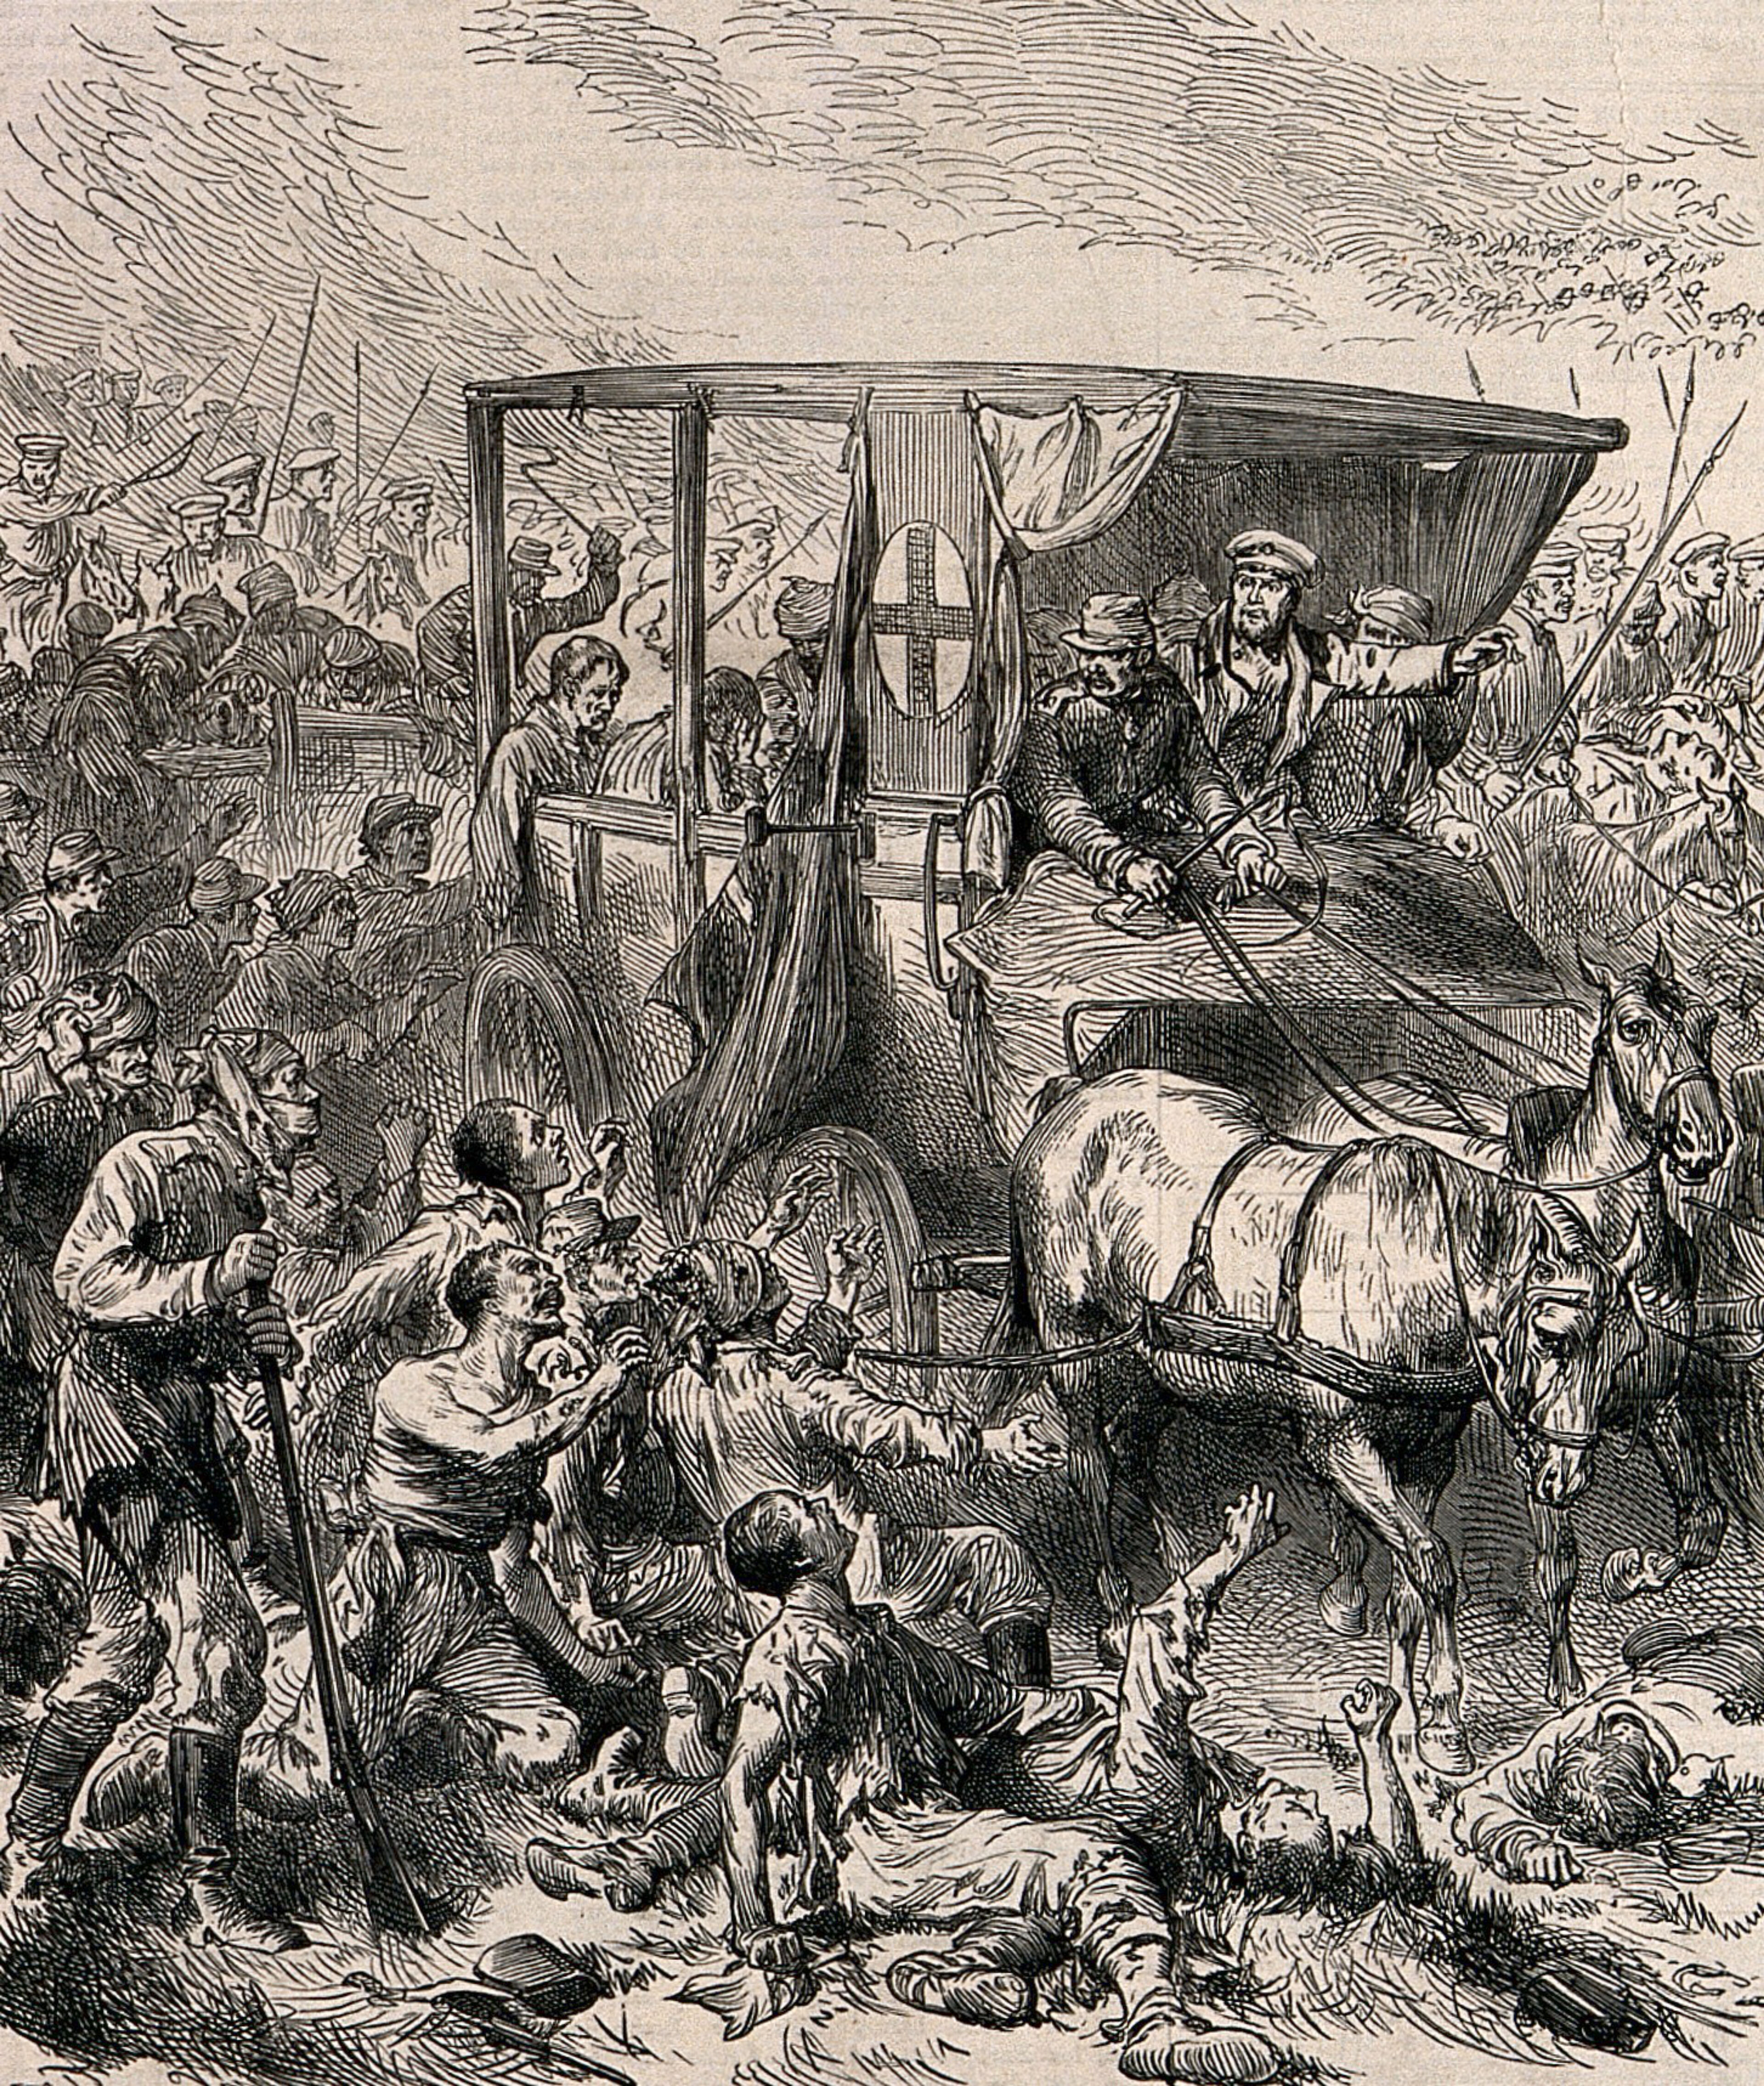 Serbo-Bulgarian War: wounded Russian soldiers begging ambulance men to be taken away from the battlefield. Wood engraving.